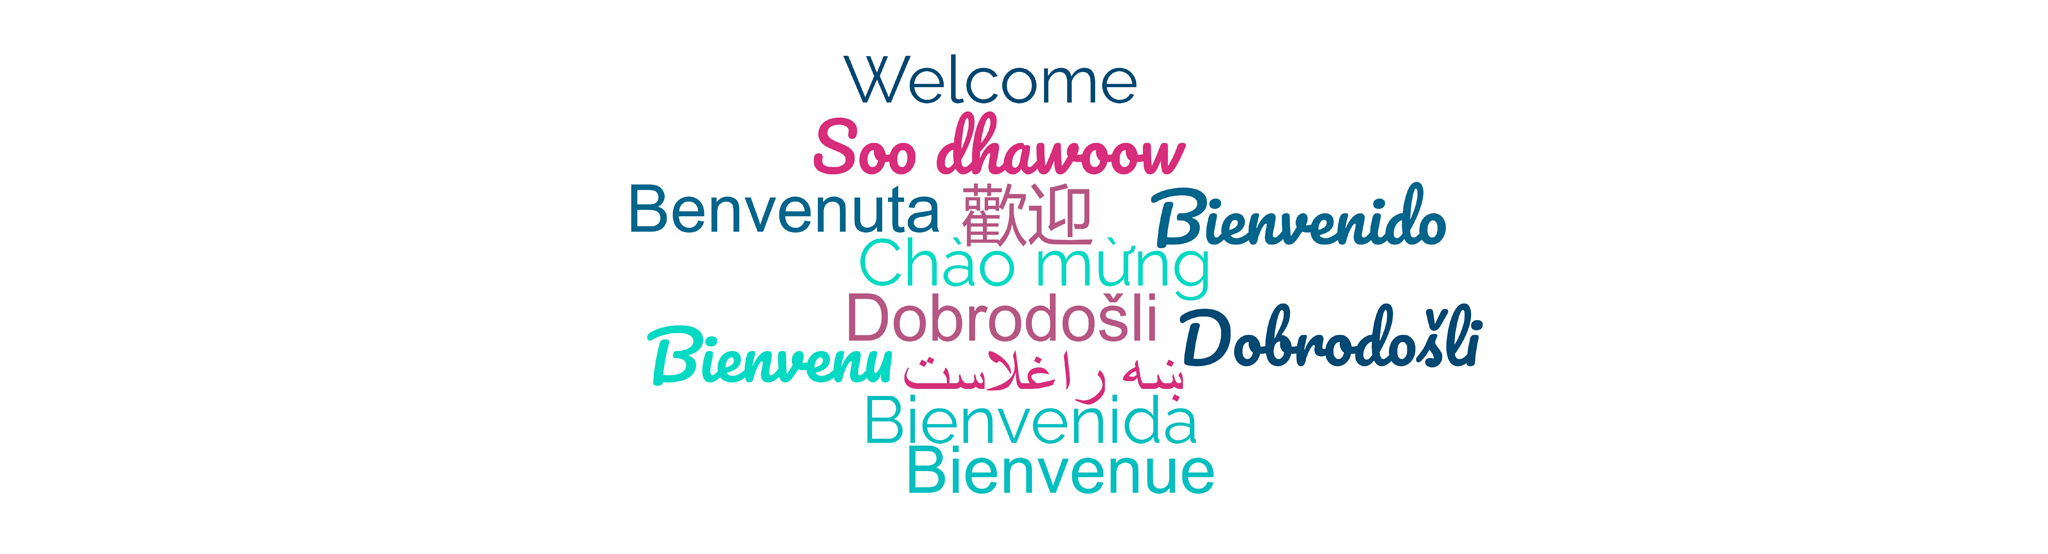 Family Care Health Centers - Welcome in different languages